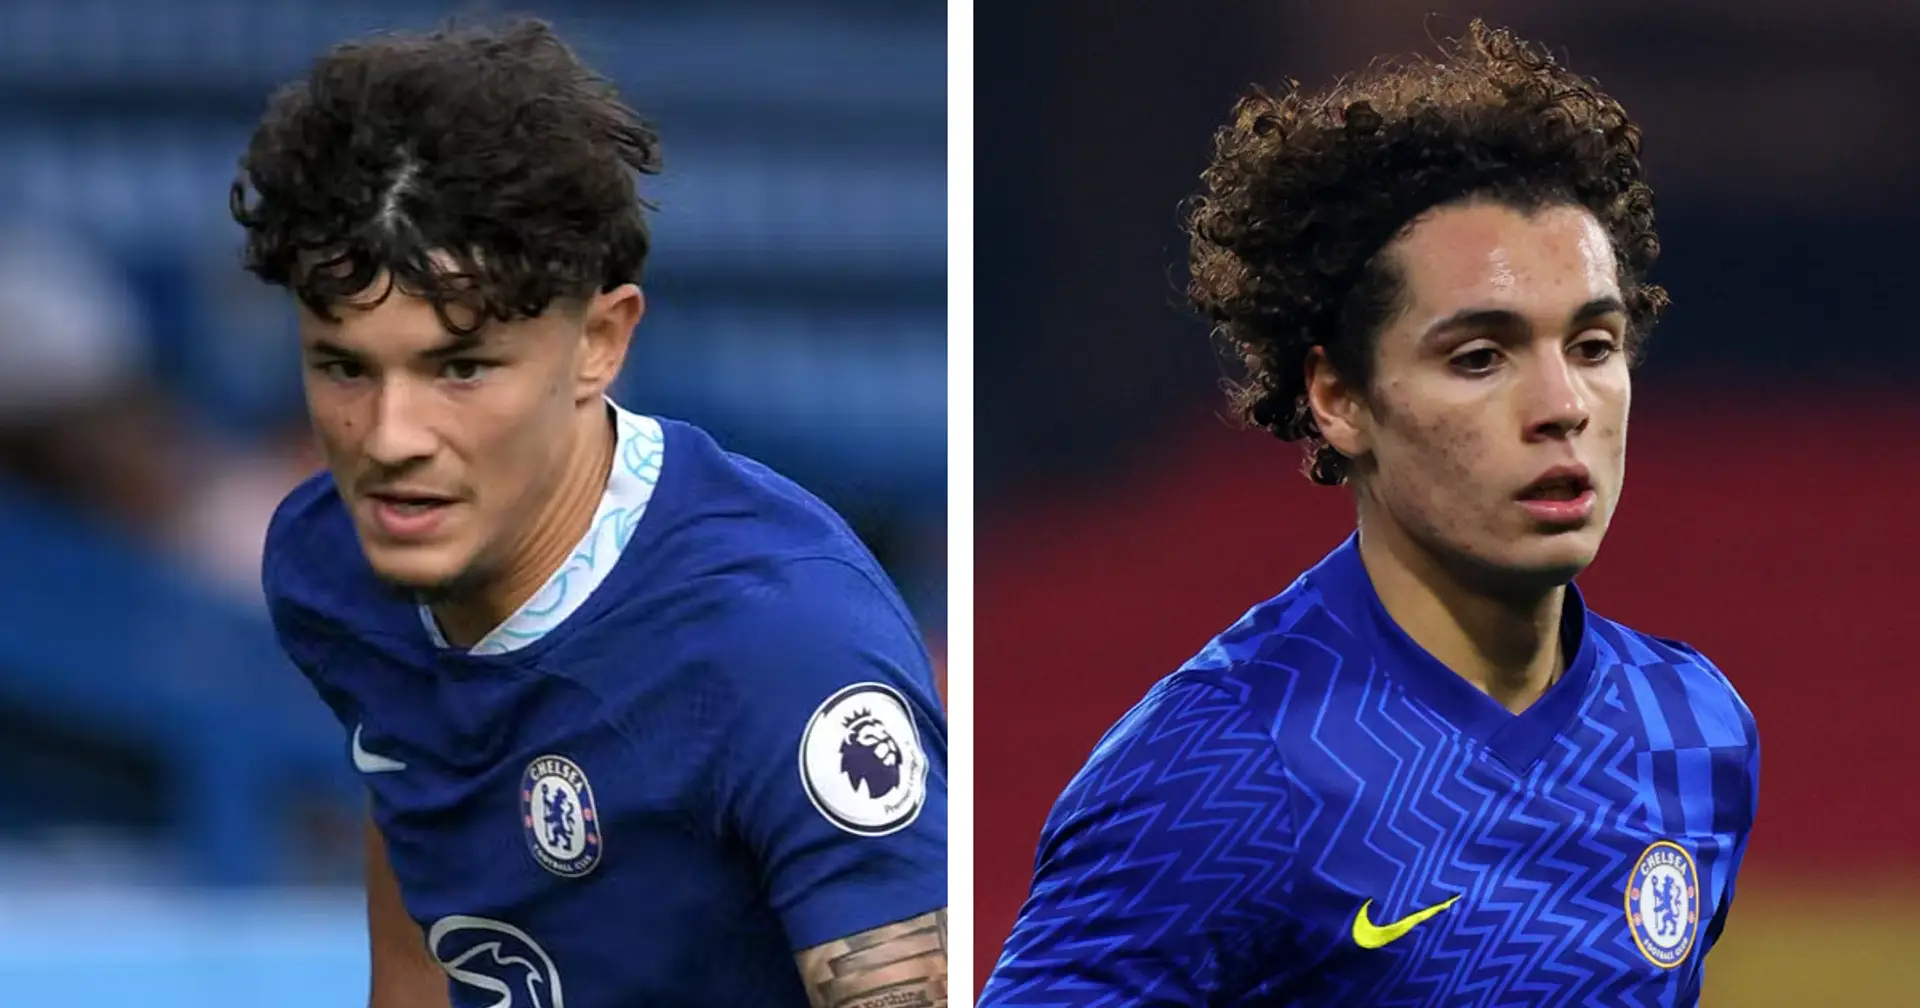 Chelsea close to losing 2 academy talents, Man City in talks to poach one of them (reliability: 5 stars)